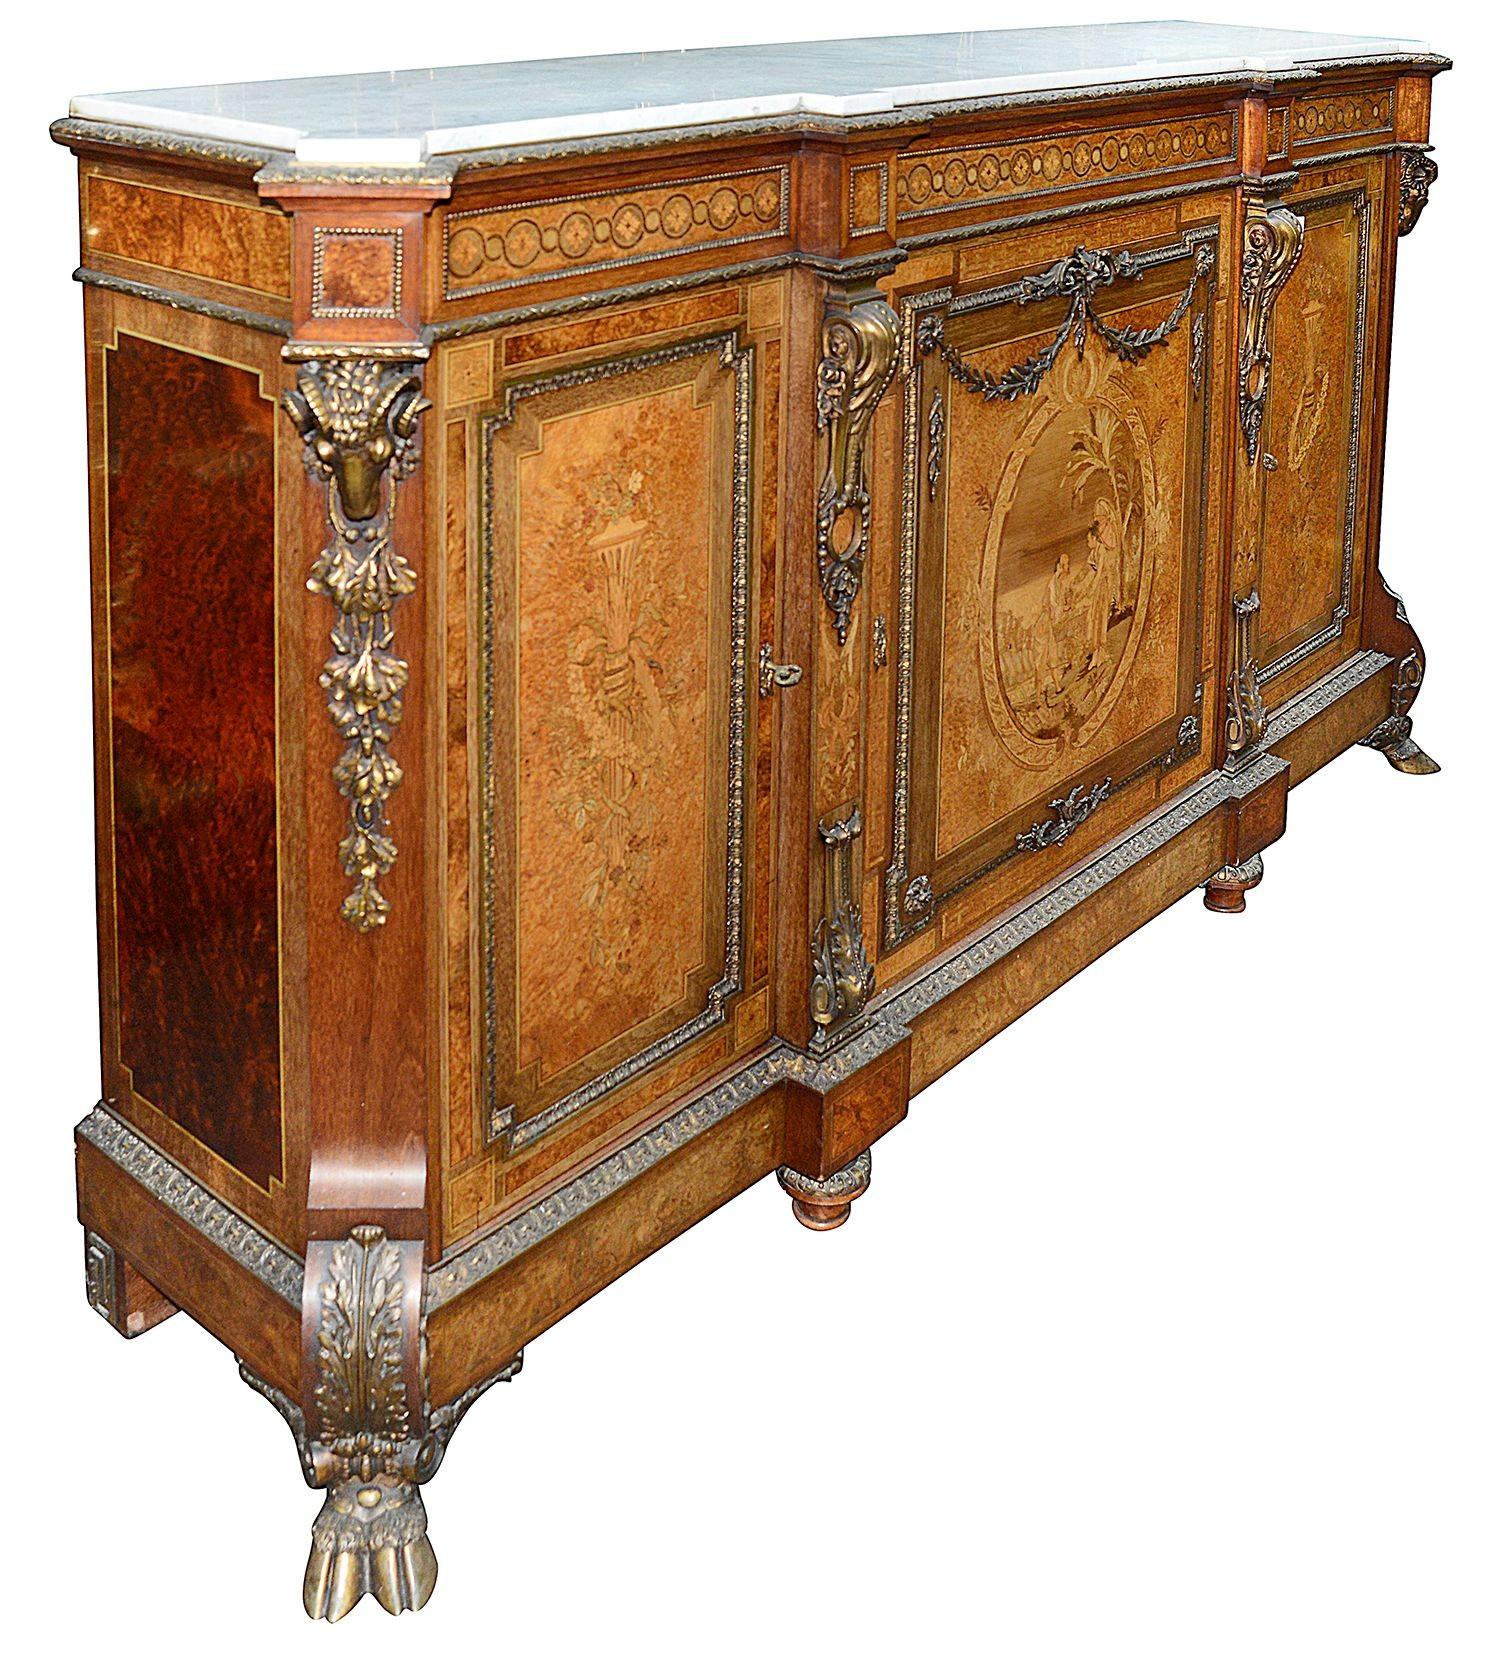 A fine quality 19th century marquetry inlaid, marble topped credenza / side cabinet. Having wonderful gilded ormolu moldings and classical Rams head mounts. Each of the three doors with neo-classical and and oriental inlaid decoration, raised on